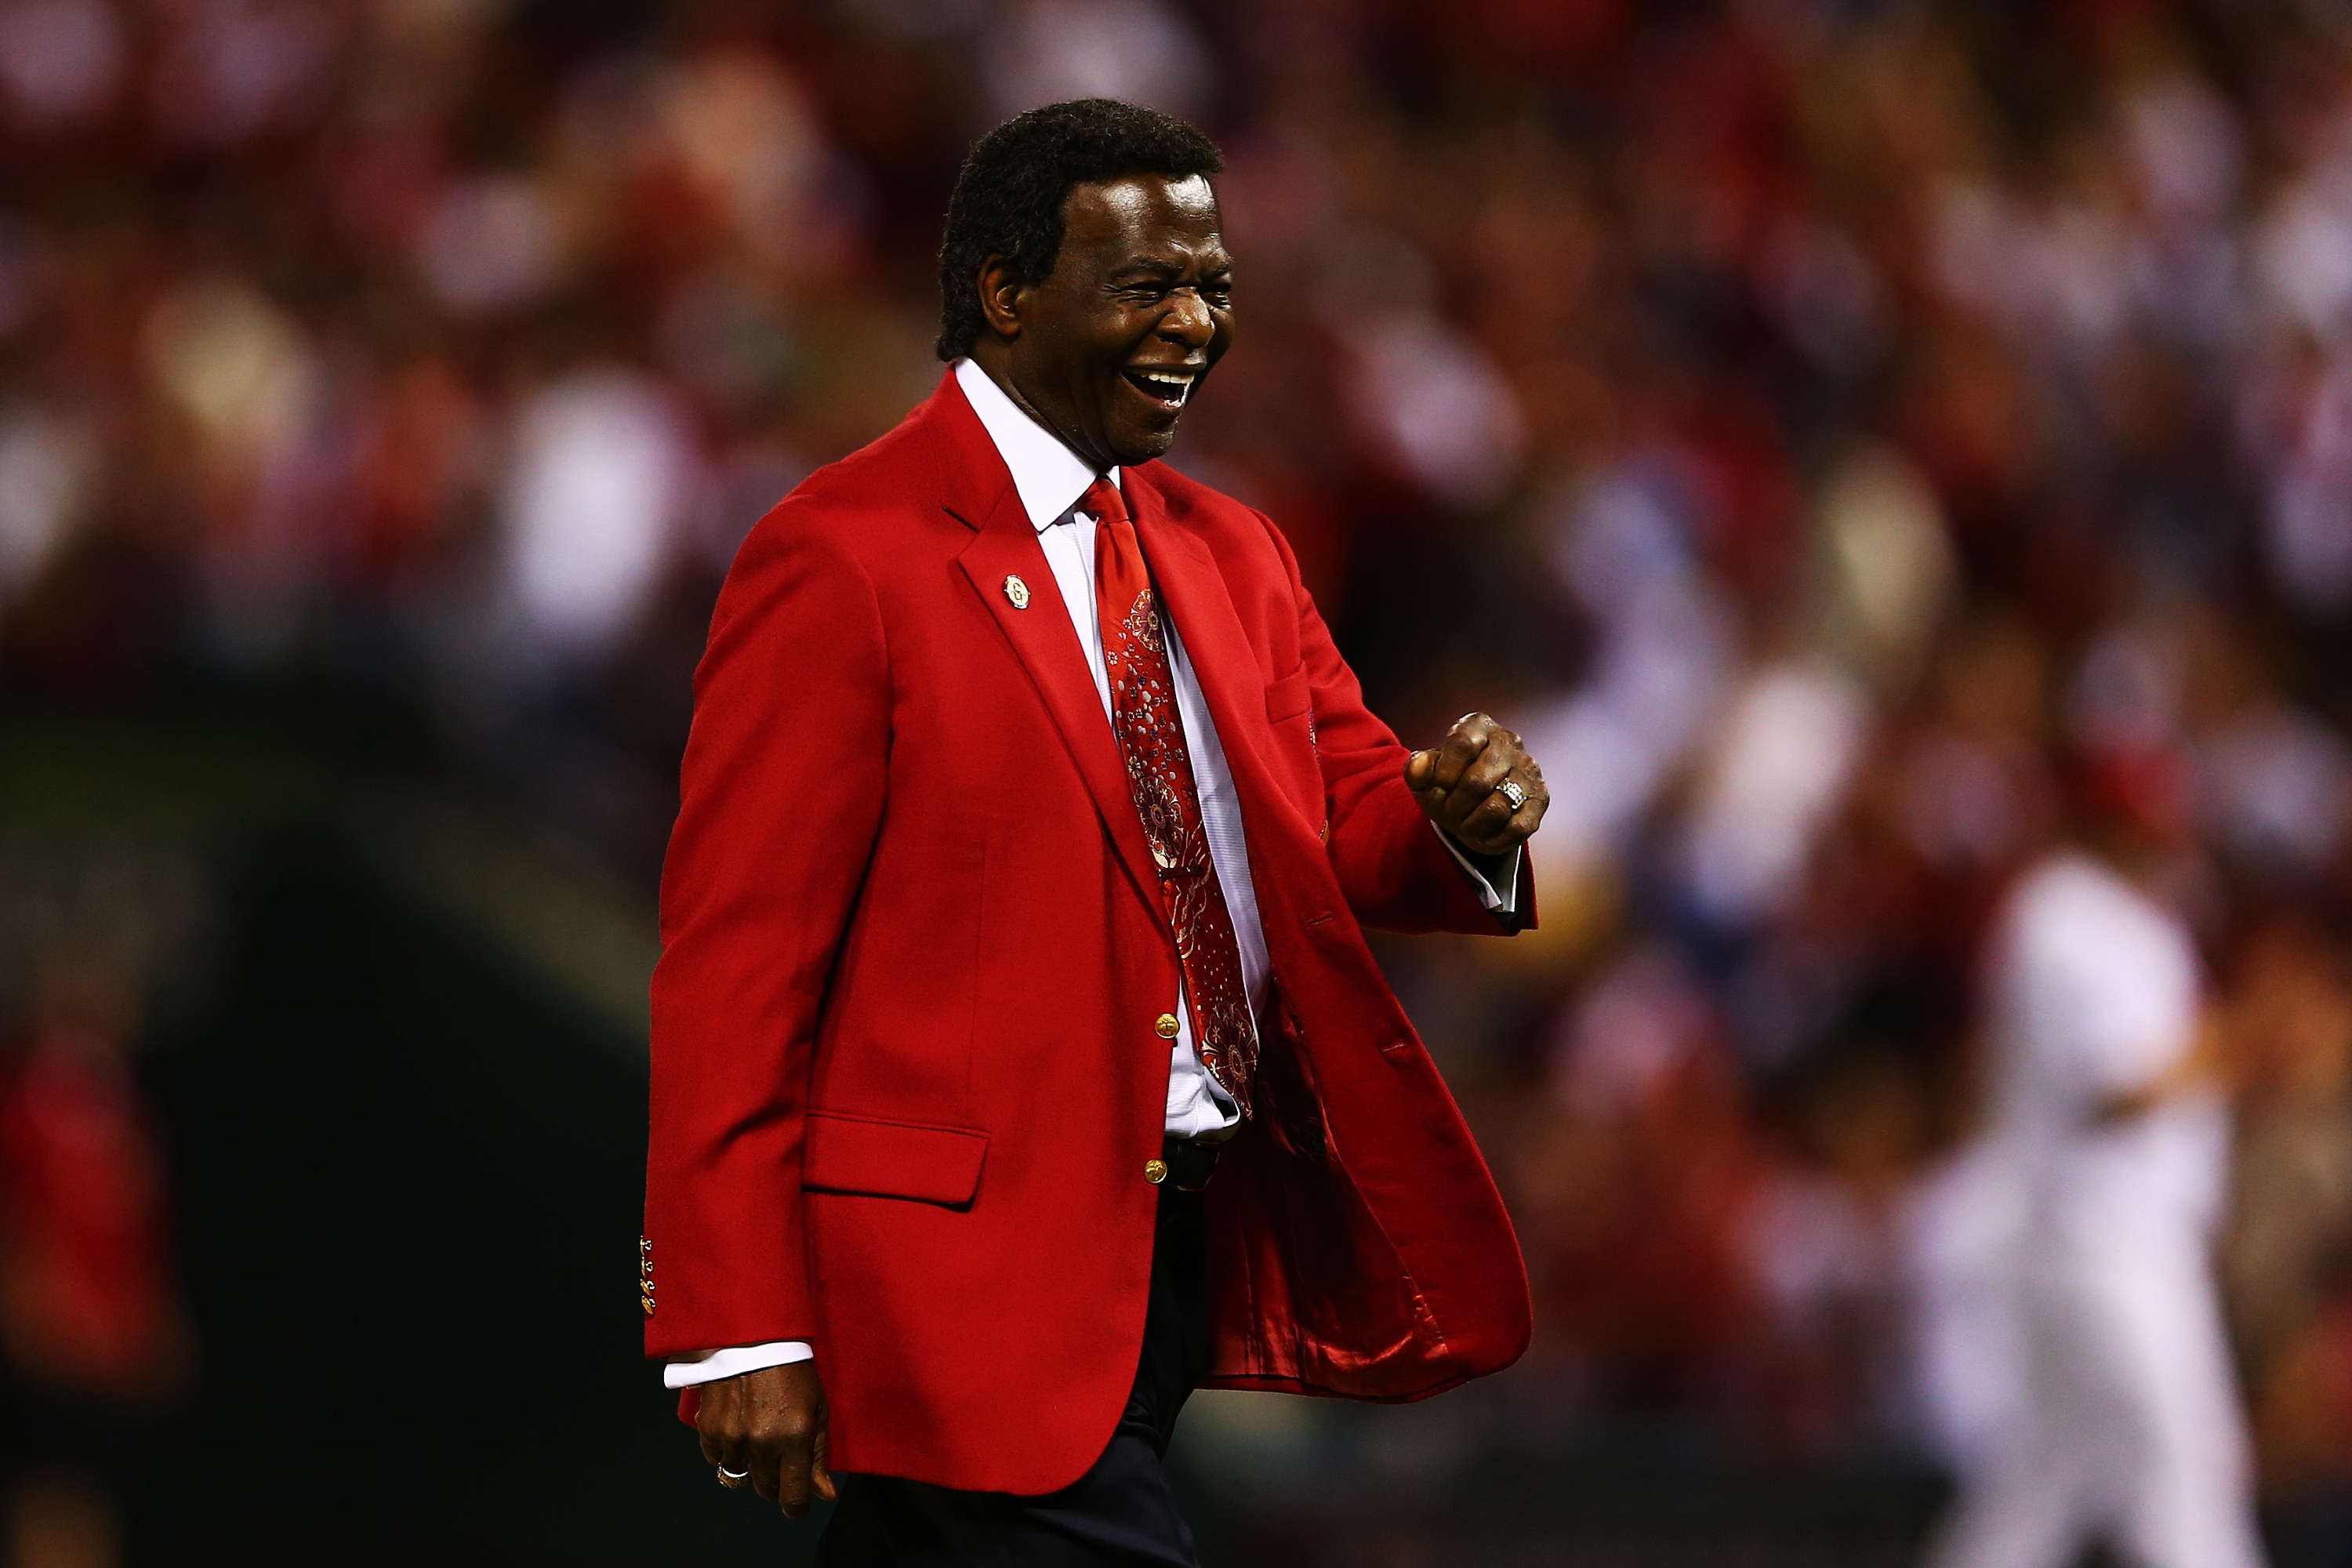 Lou Brock reacts after throwing out the ceremonial first pitch prior to Game Five of the National League Division Series in 2012. (Getty Images)